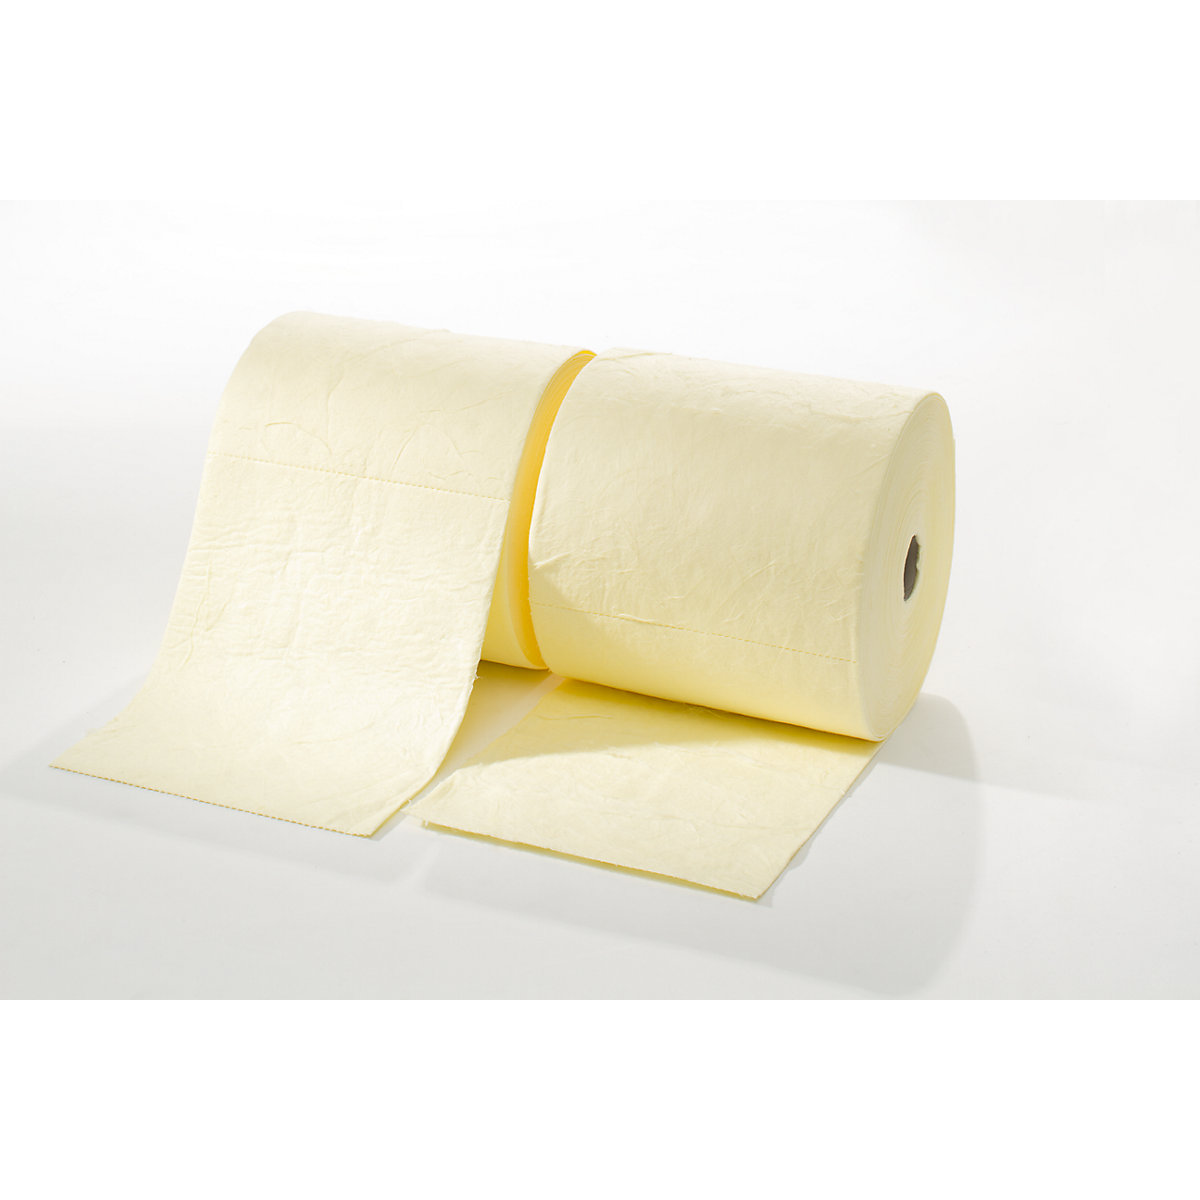 FIRST absorbent sheeting, roll of sheeting, medium version, for chemicals, 400 mm x 60 m, pack of 2 rolls-17